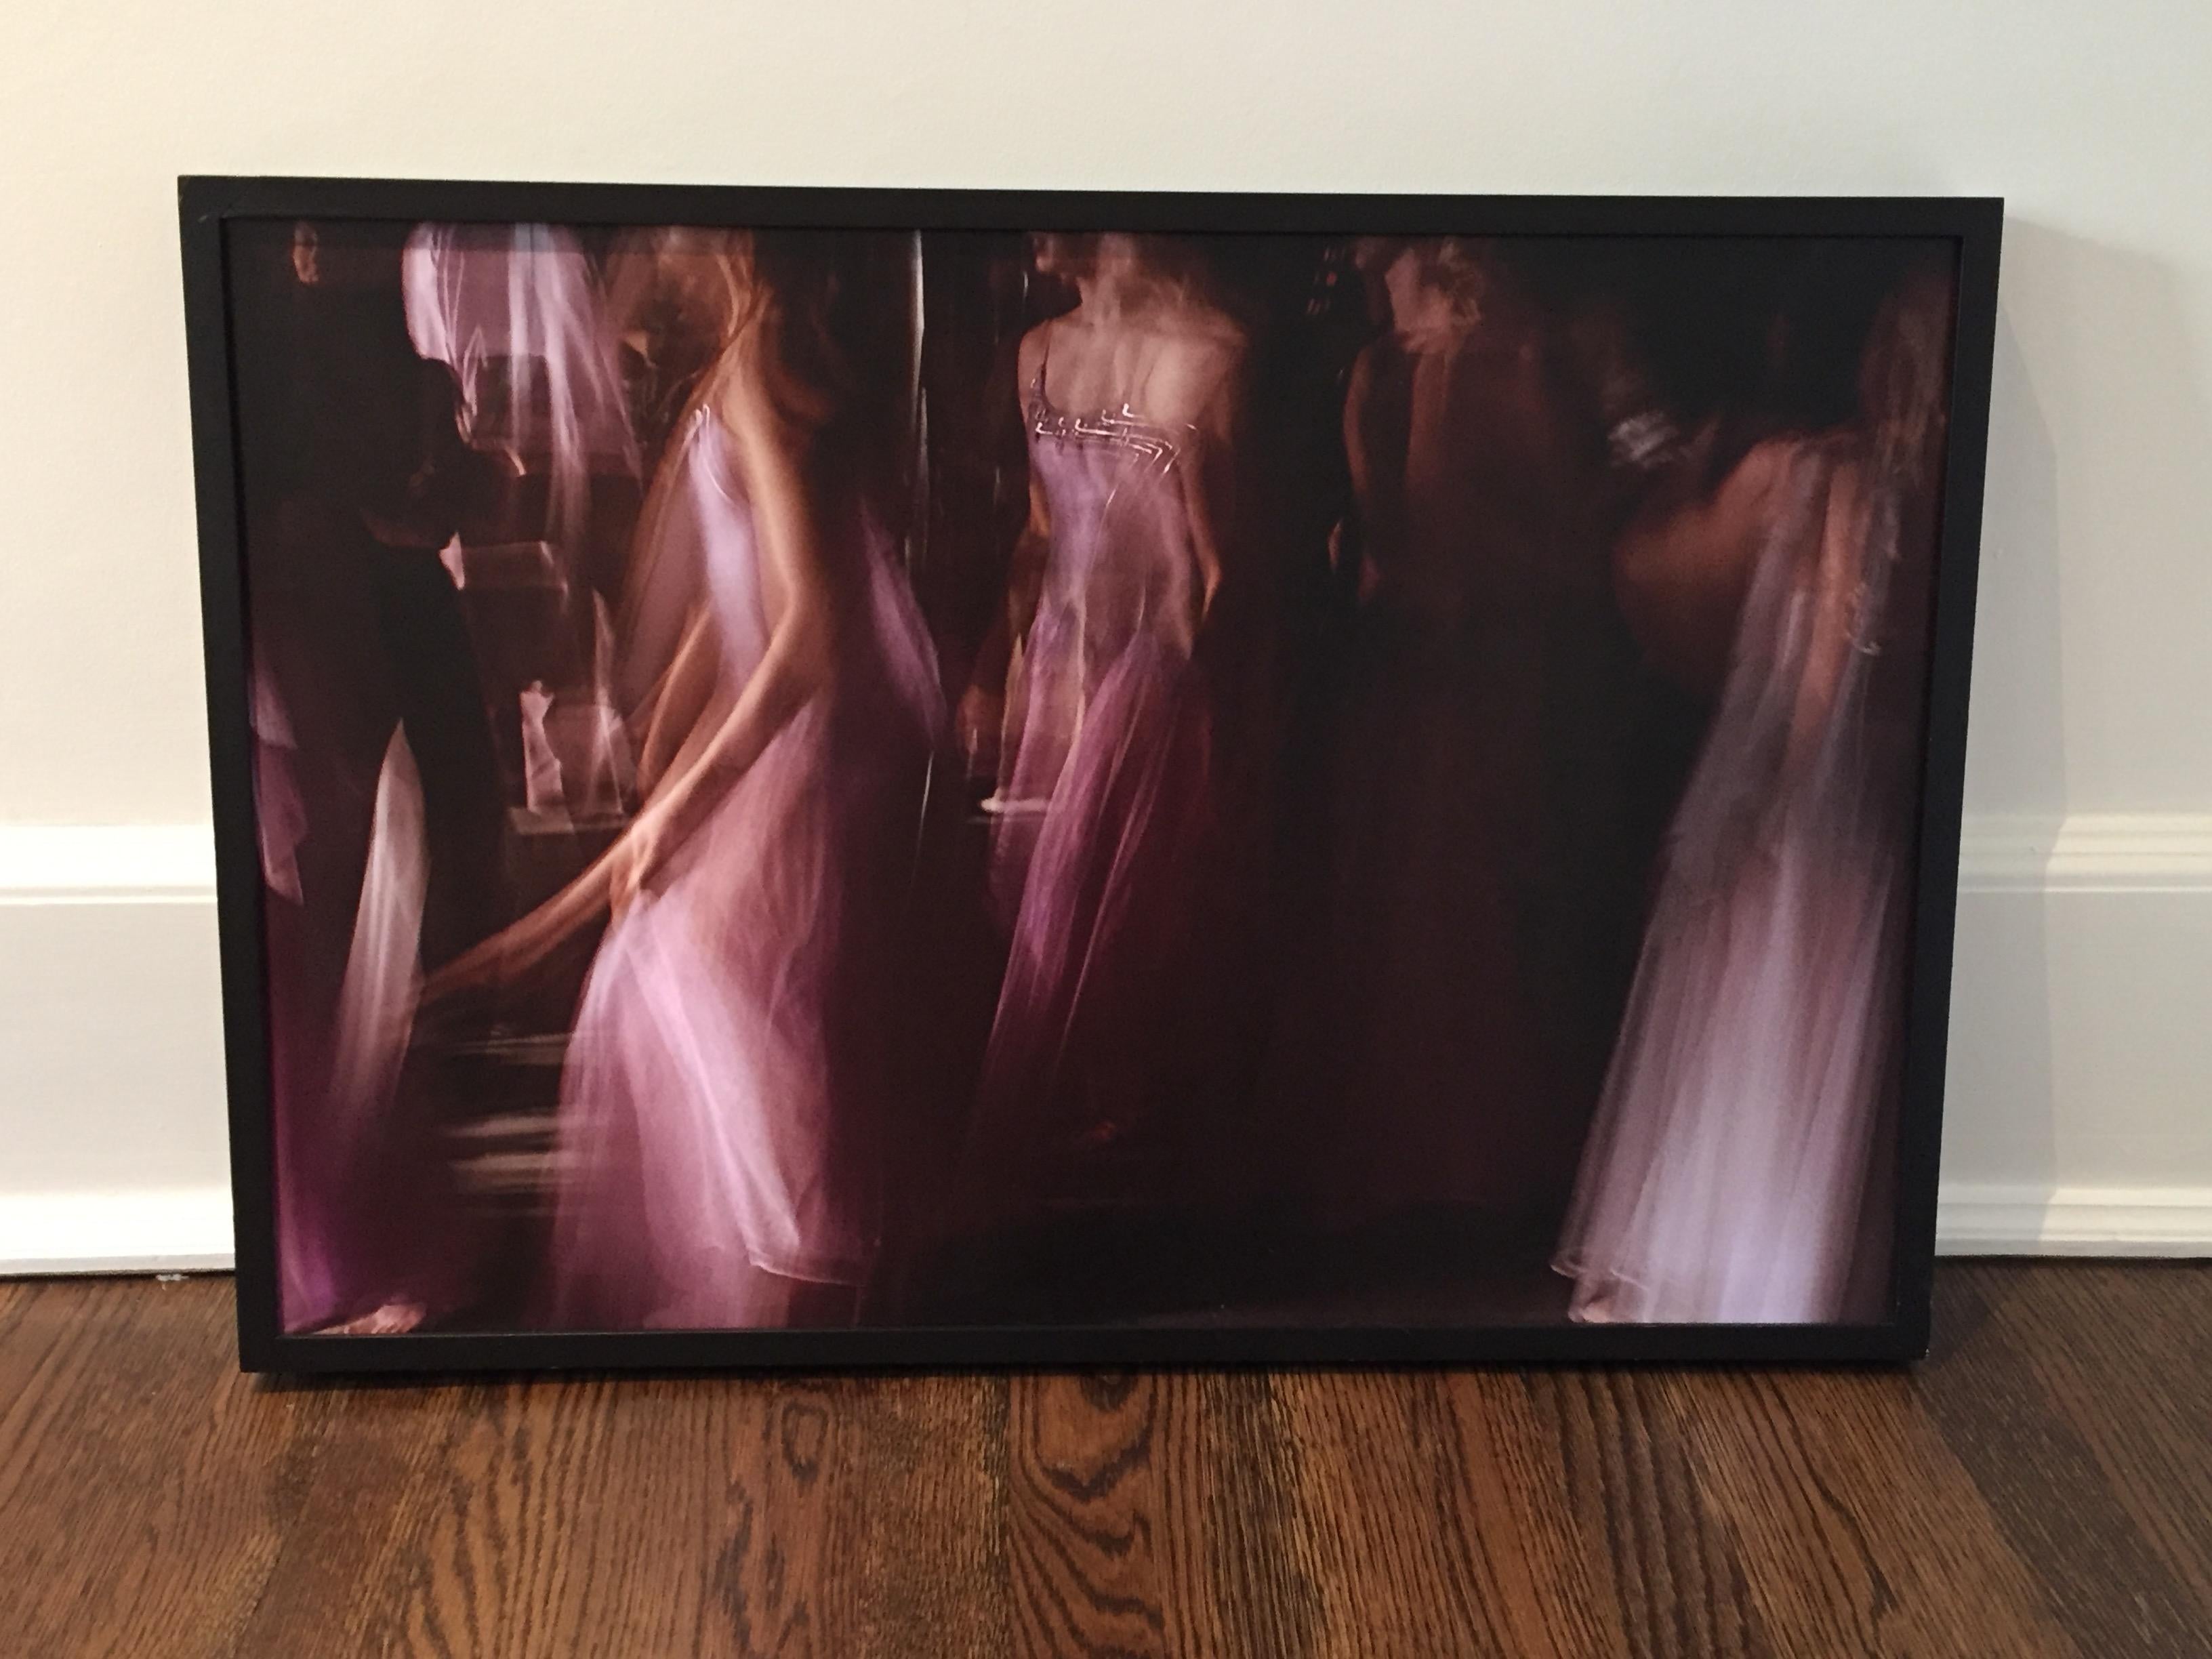 Contemporary Photography Henry Leutwyler photography abstract gelatin silver print authentic and fabulous
Beautiful images of the ballet, from renowned artist Henry Leutwyler
Overall dimensions 29 x 1 x 22.

Born in Switzerland in 1961,